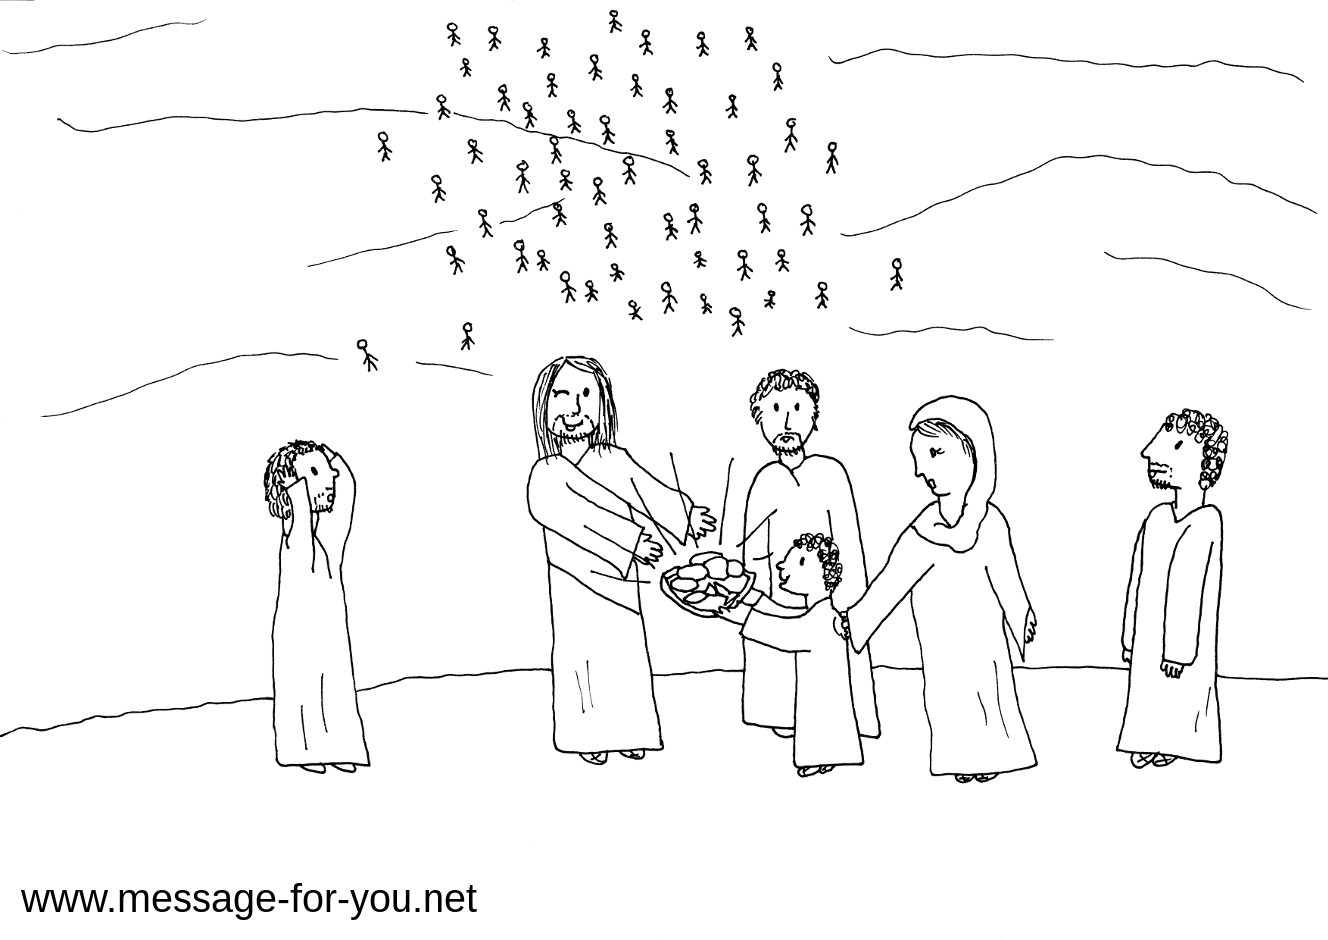 Printable Coloring Pages Jesus Feeds 5000 Coloring Pages Free Colouring Pages To Download Message